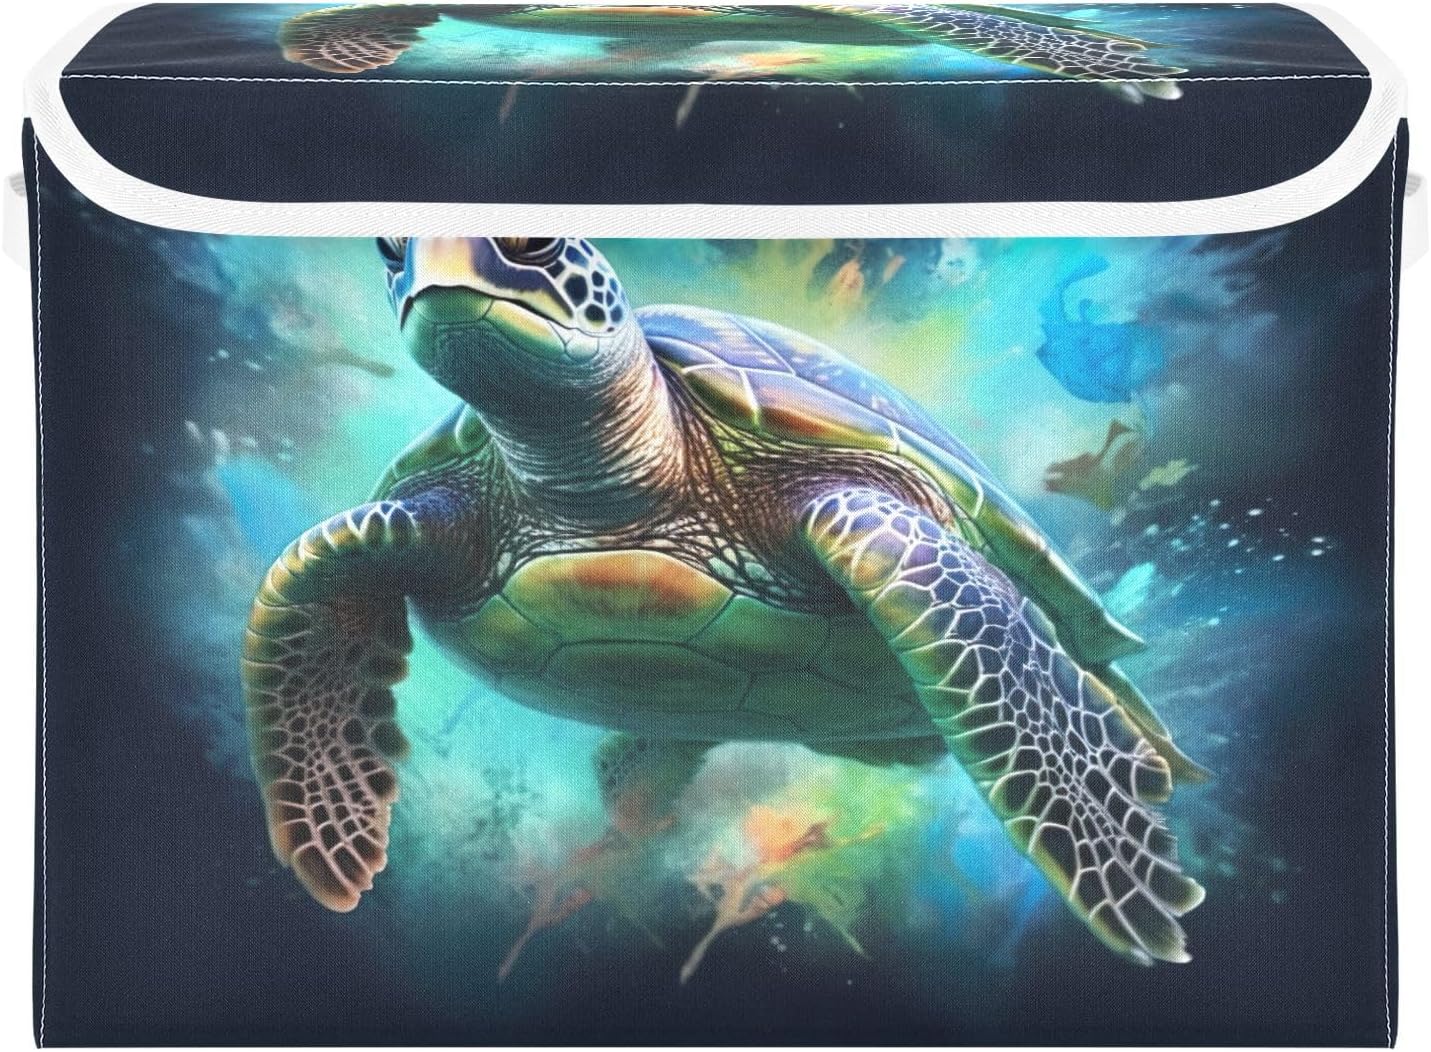 Green Sea Turtle Storage Basket 16.5x12.6x11.8 In Collapsible Fabric Storage Cubes Organizer Large Storage Bin with Lids and Handles for Shelves Bedroom Closet Office